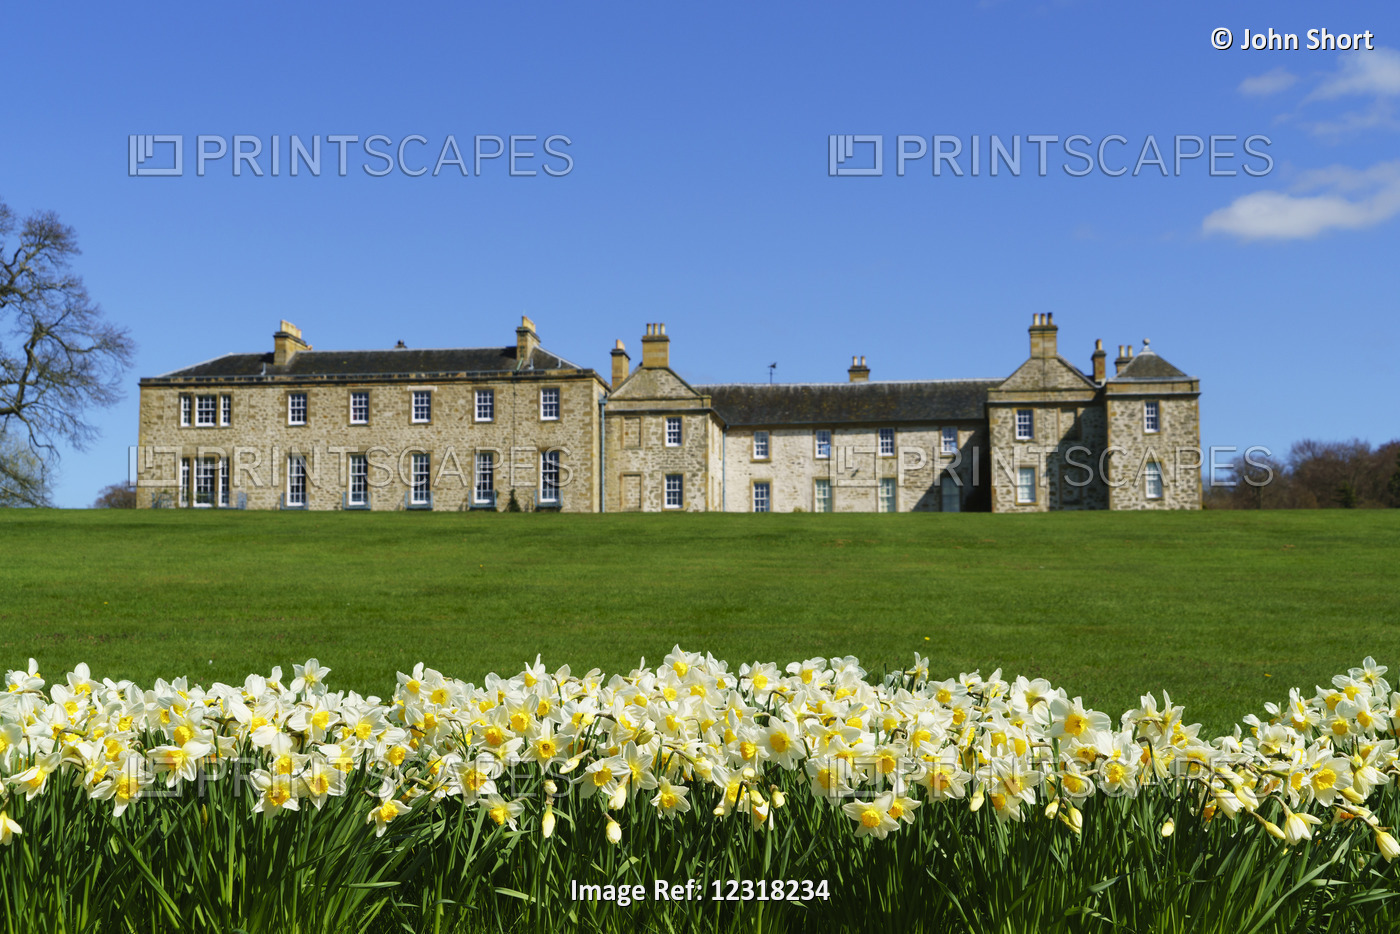 Large House With Lush Grass And Daffodils In Bloom In The Foreground; ...